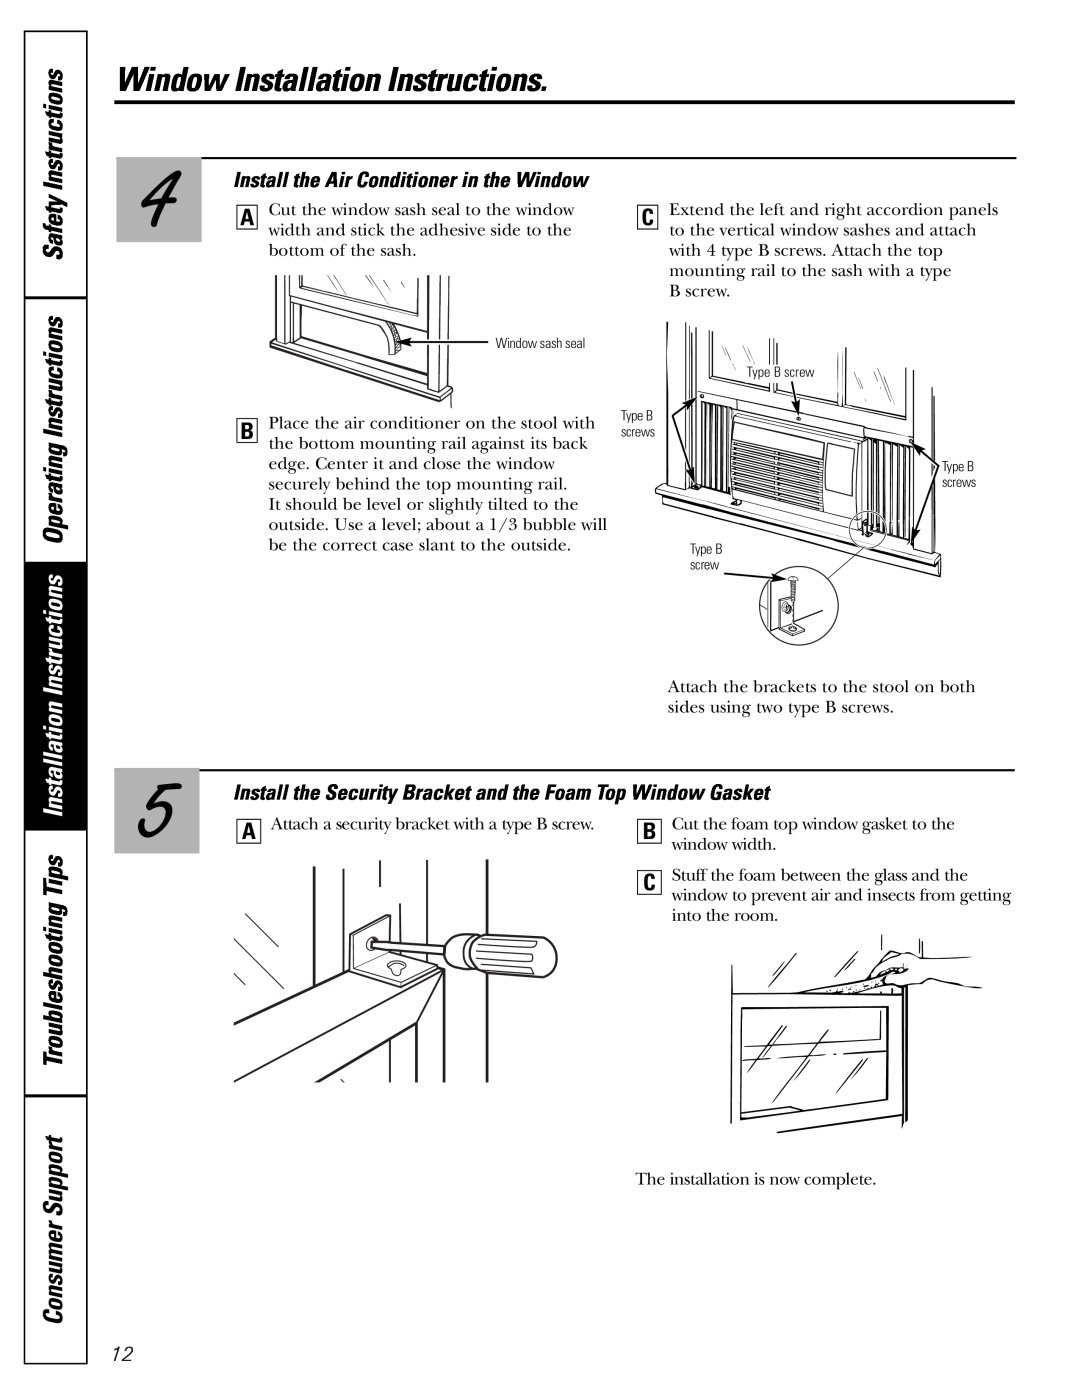 GE ASP05 Install the Air Conditioner in the Window, Window Installation Instructions, Safety, Instructions Operating 